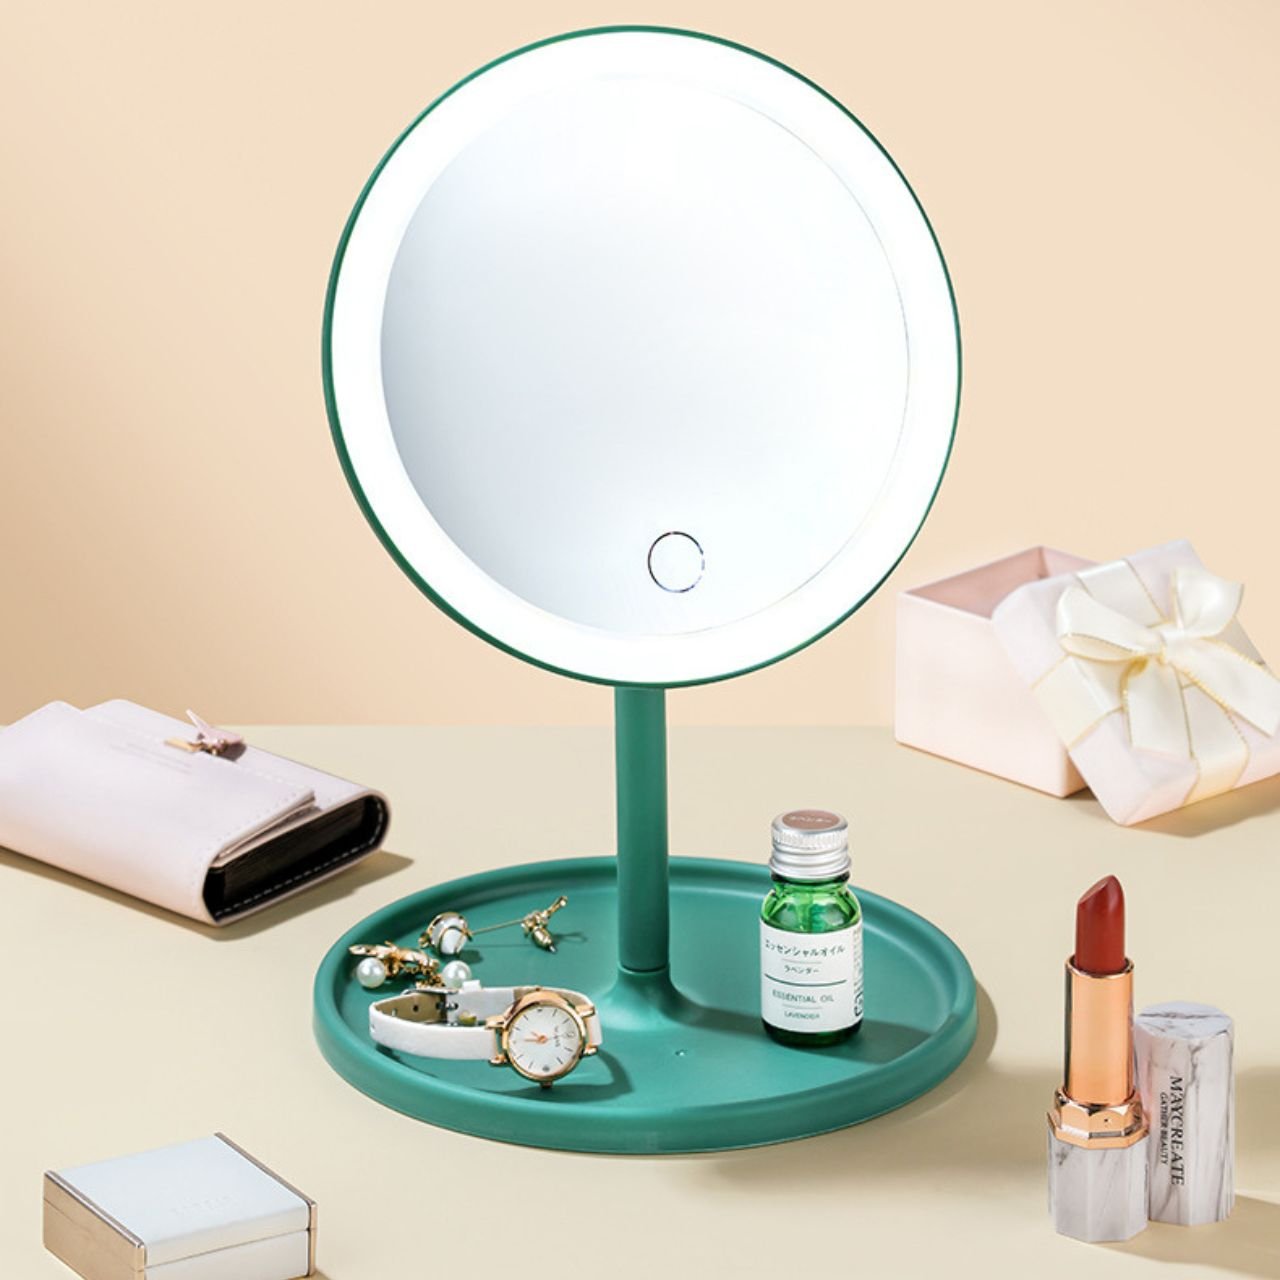 LED Make-Up Mirror green color on decorative background